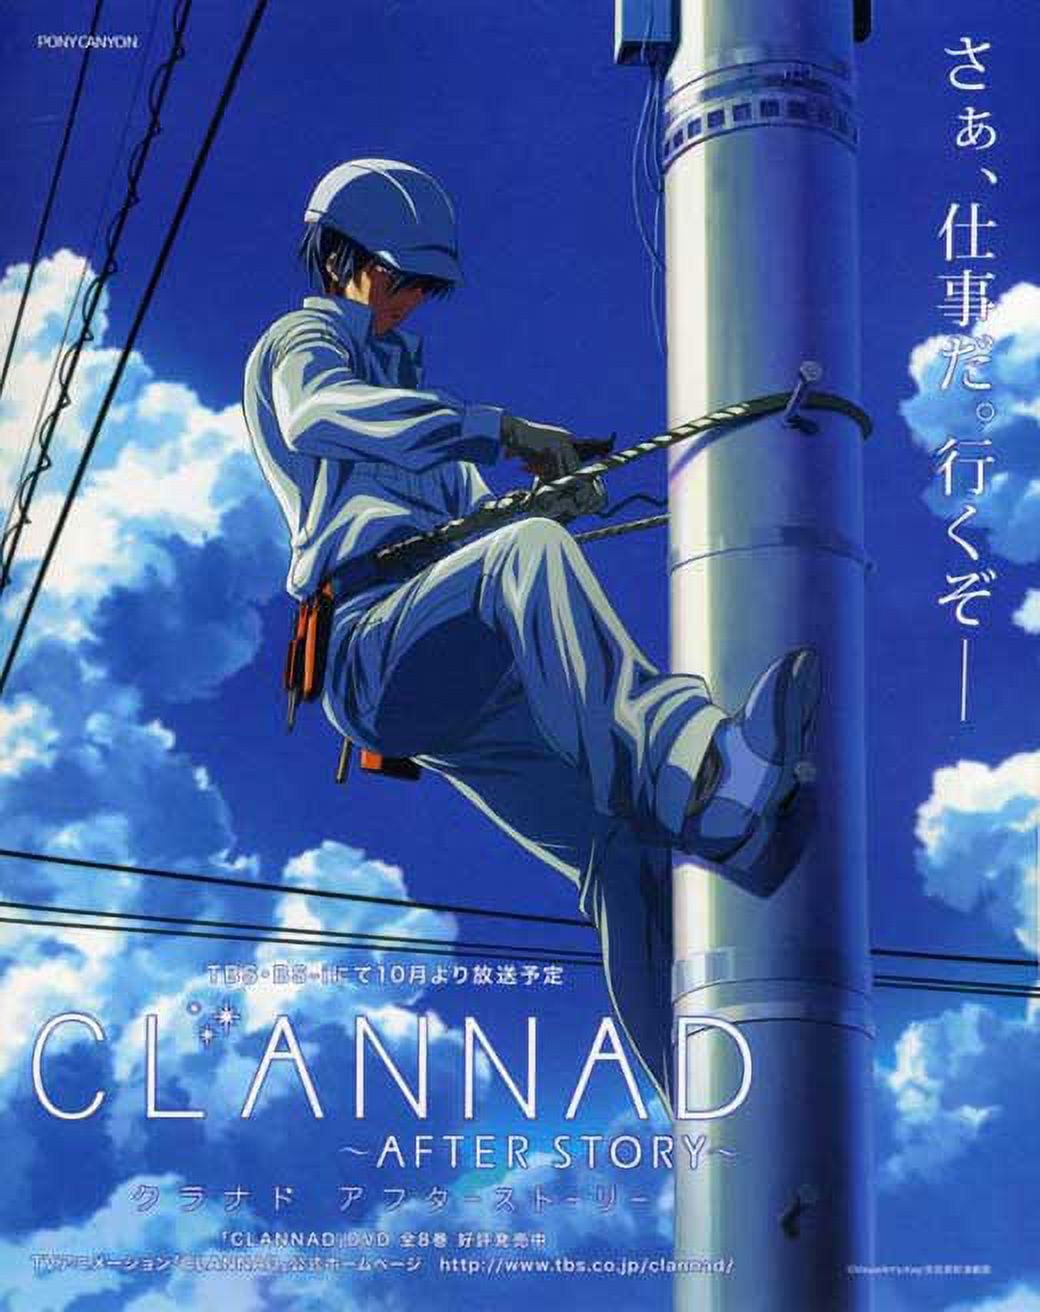  Clannad: After Story - Collection 1 : CLANNAD AFTER STORY  COLLECTION 1: Movies & TV